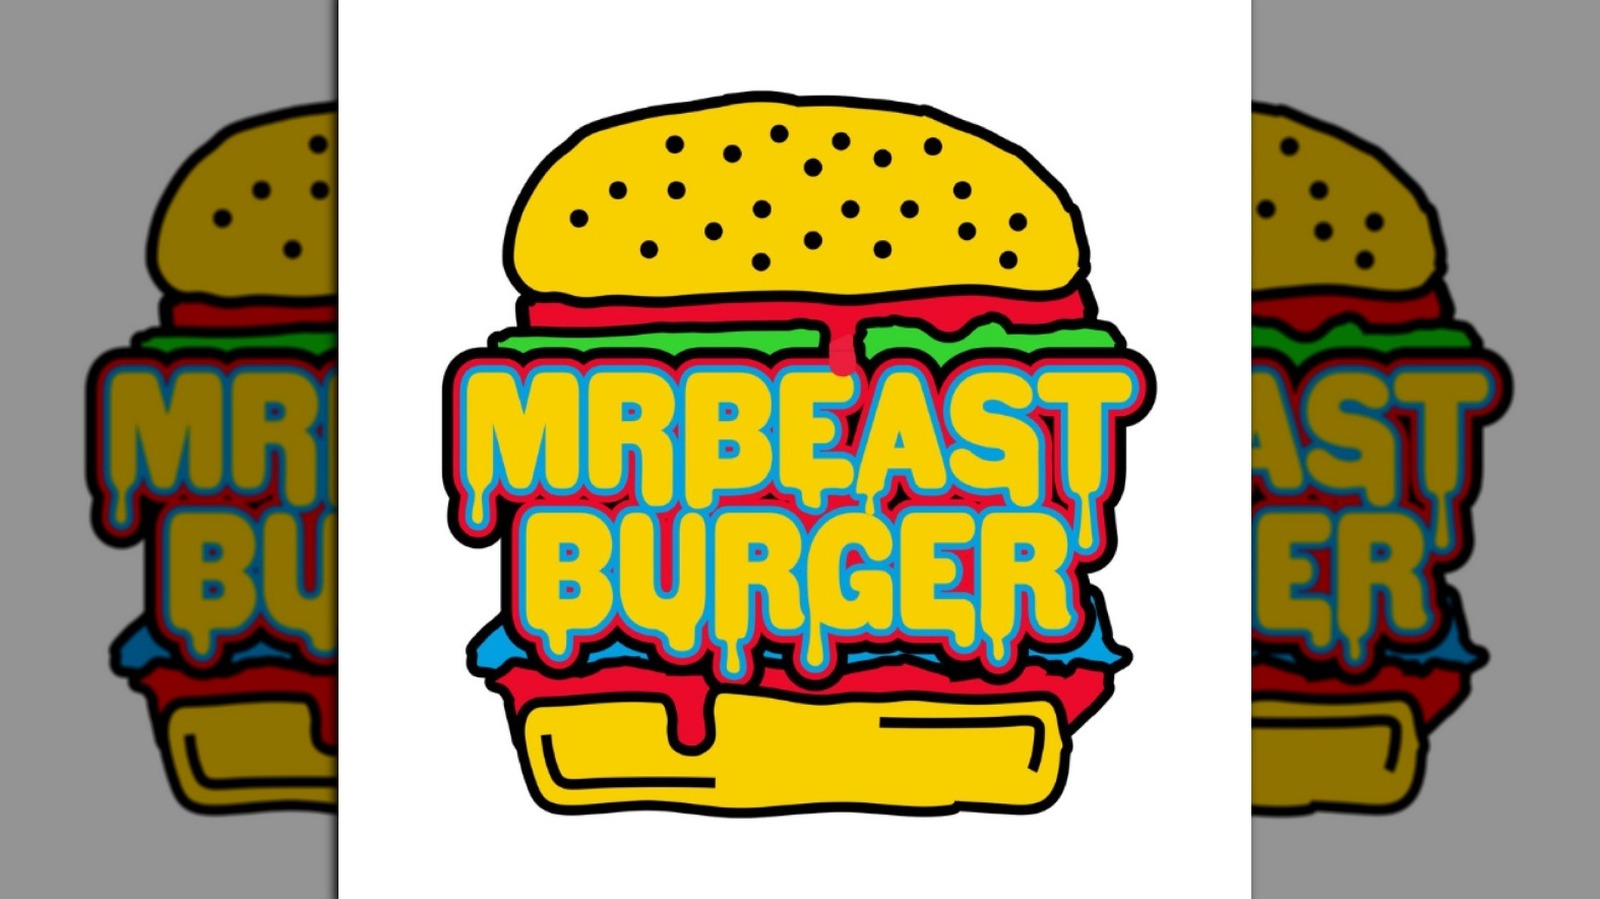 I Went To The MrBeast Burger Location At The American Dream Mall